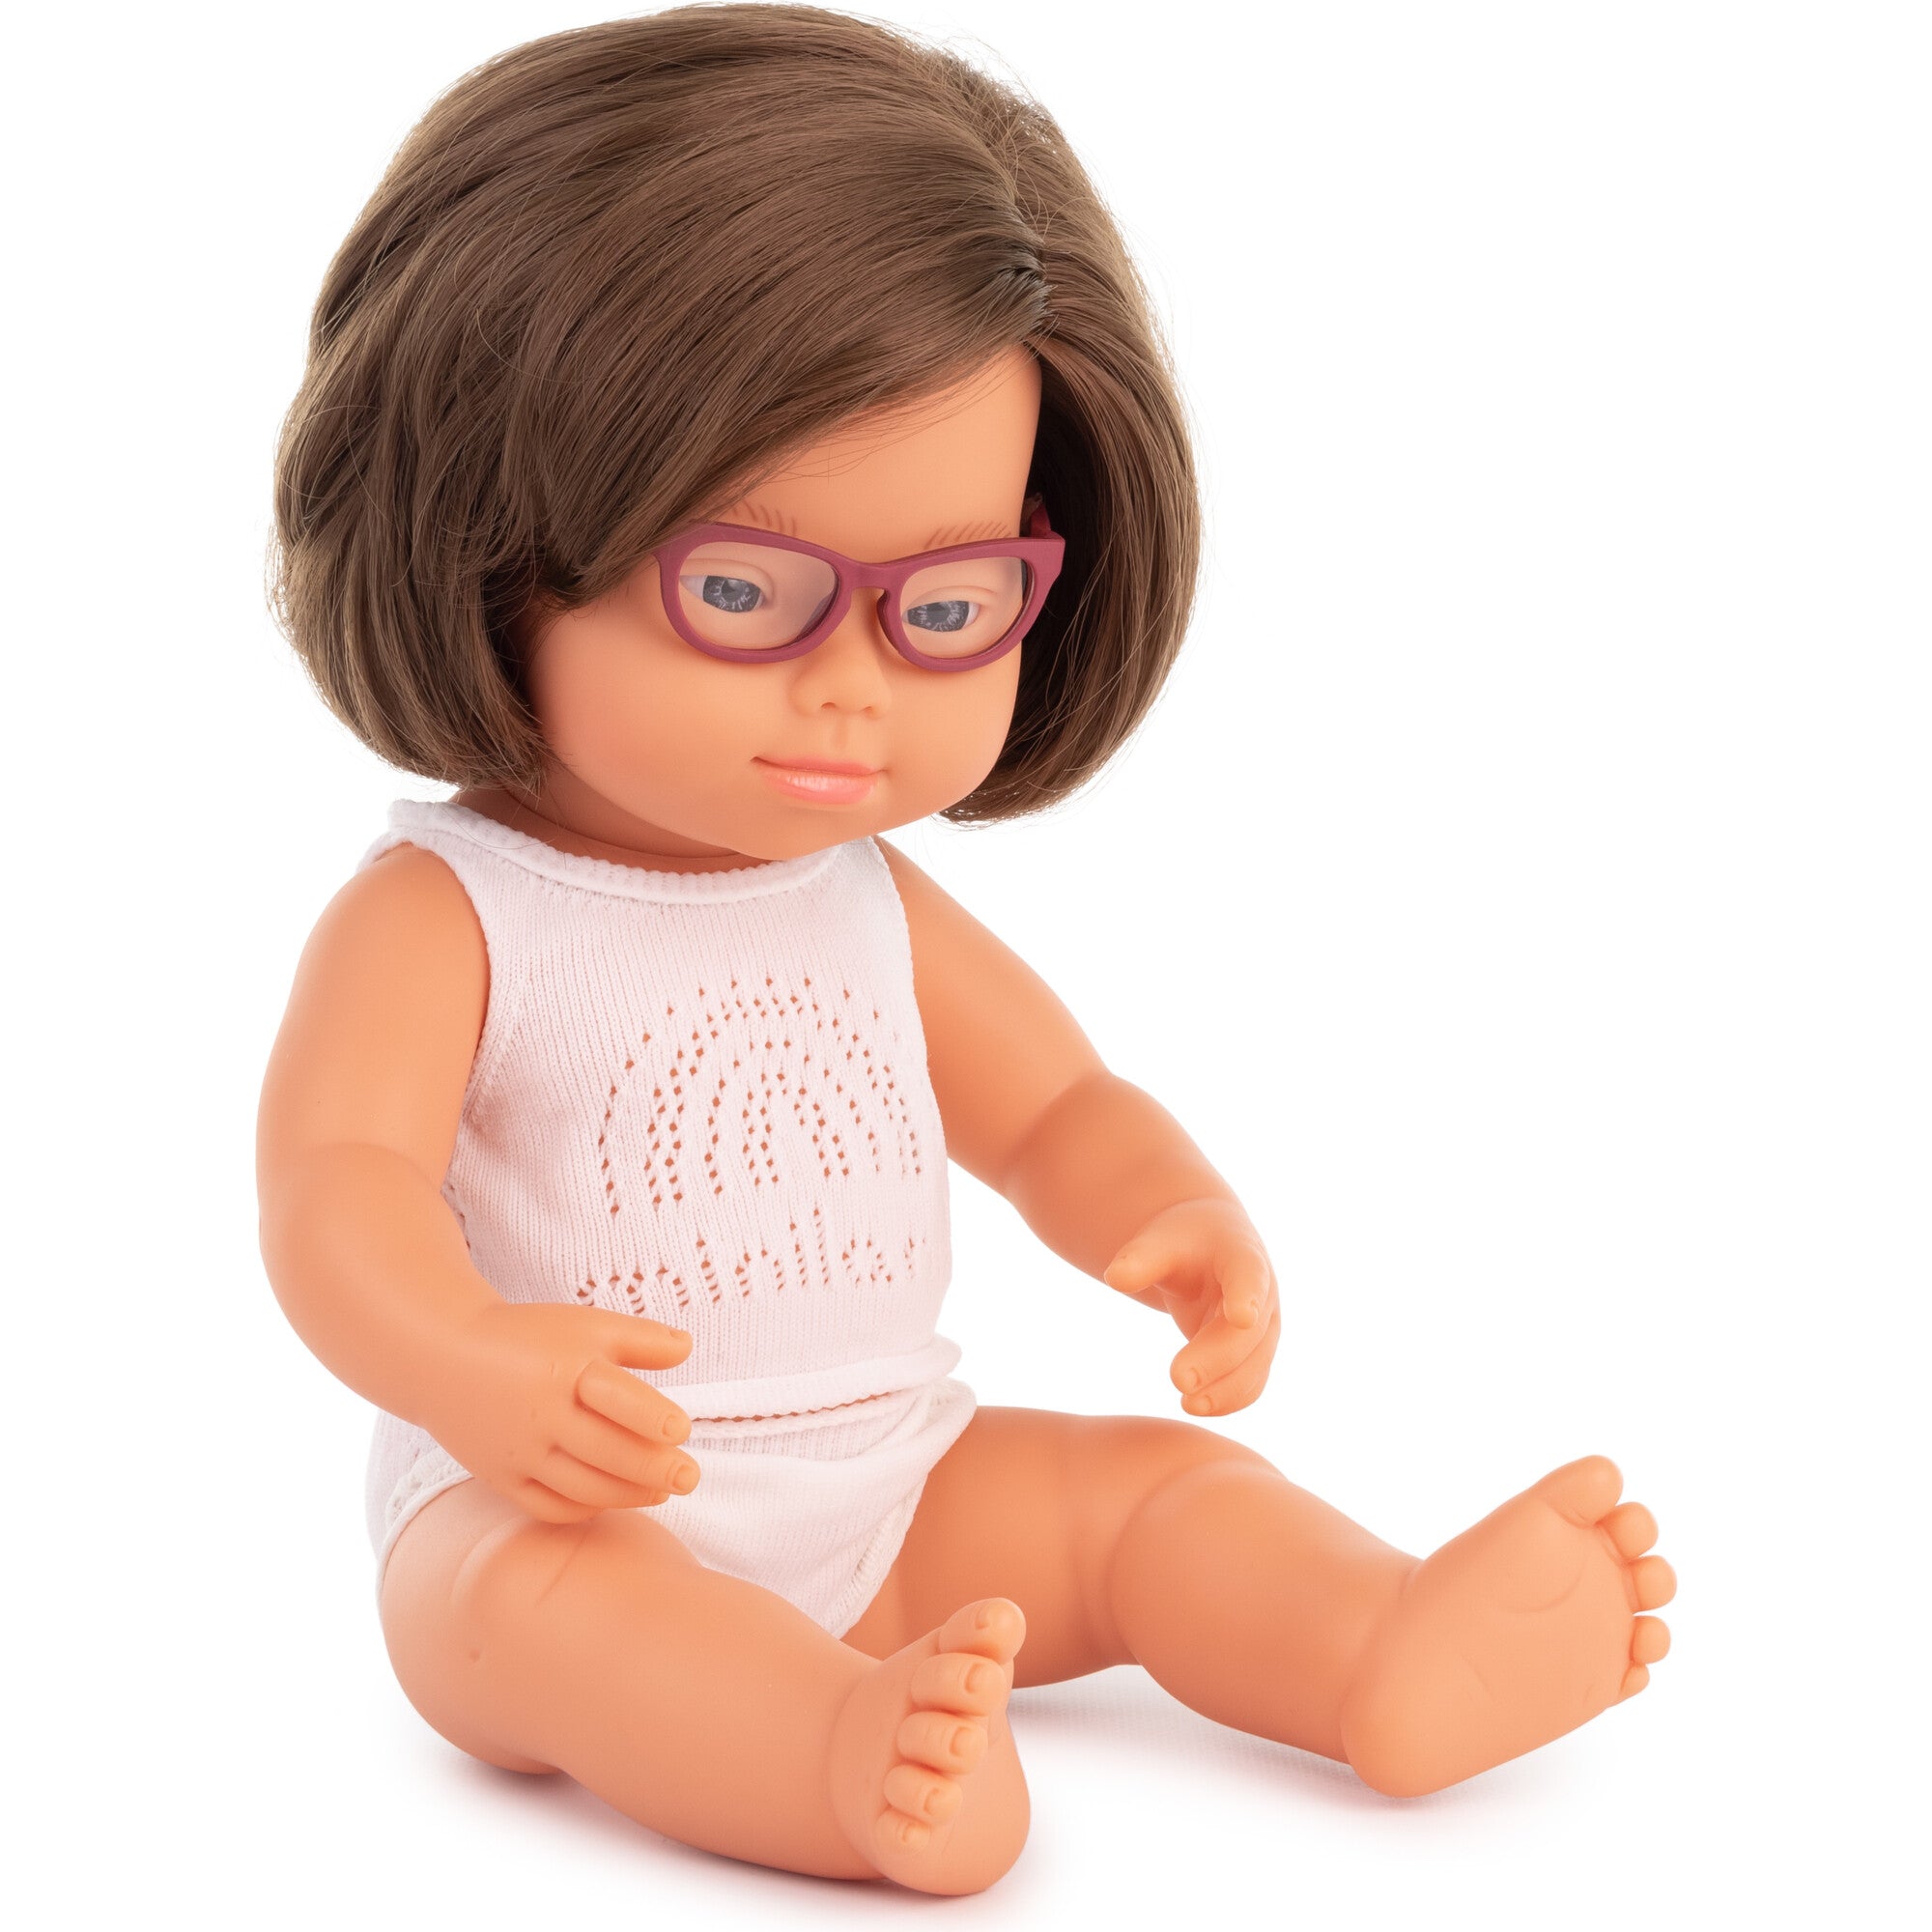 Miniland Baby Doll Caucasian Girl with Down Syndrome with Glasses 15" Dolls